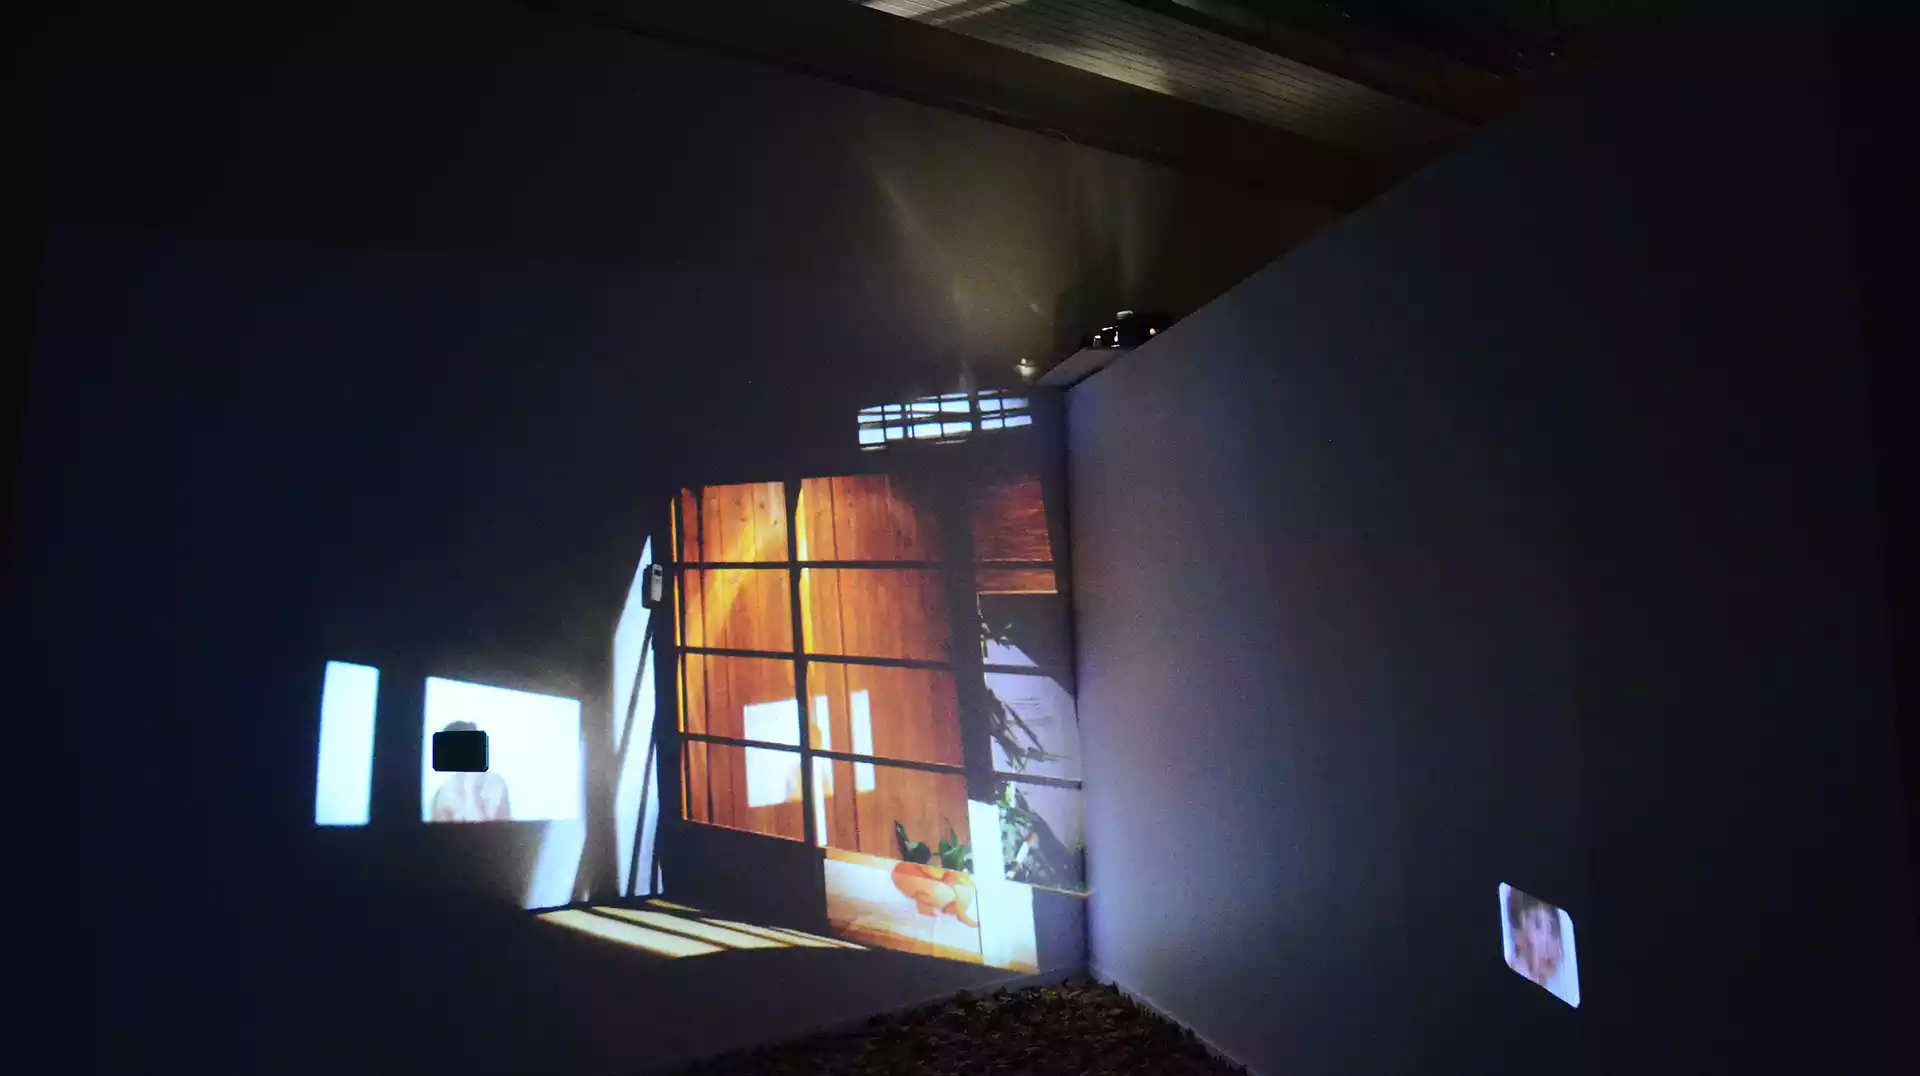 2012_oeuvres_lumiere_in_situ_projection_photographies_corps_Japon_miroir_feuilles_ginkgo_Roche_Yon_Waga_sugata